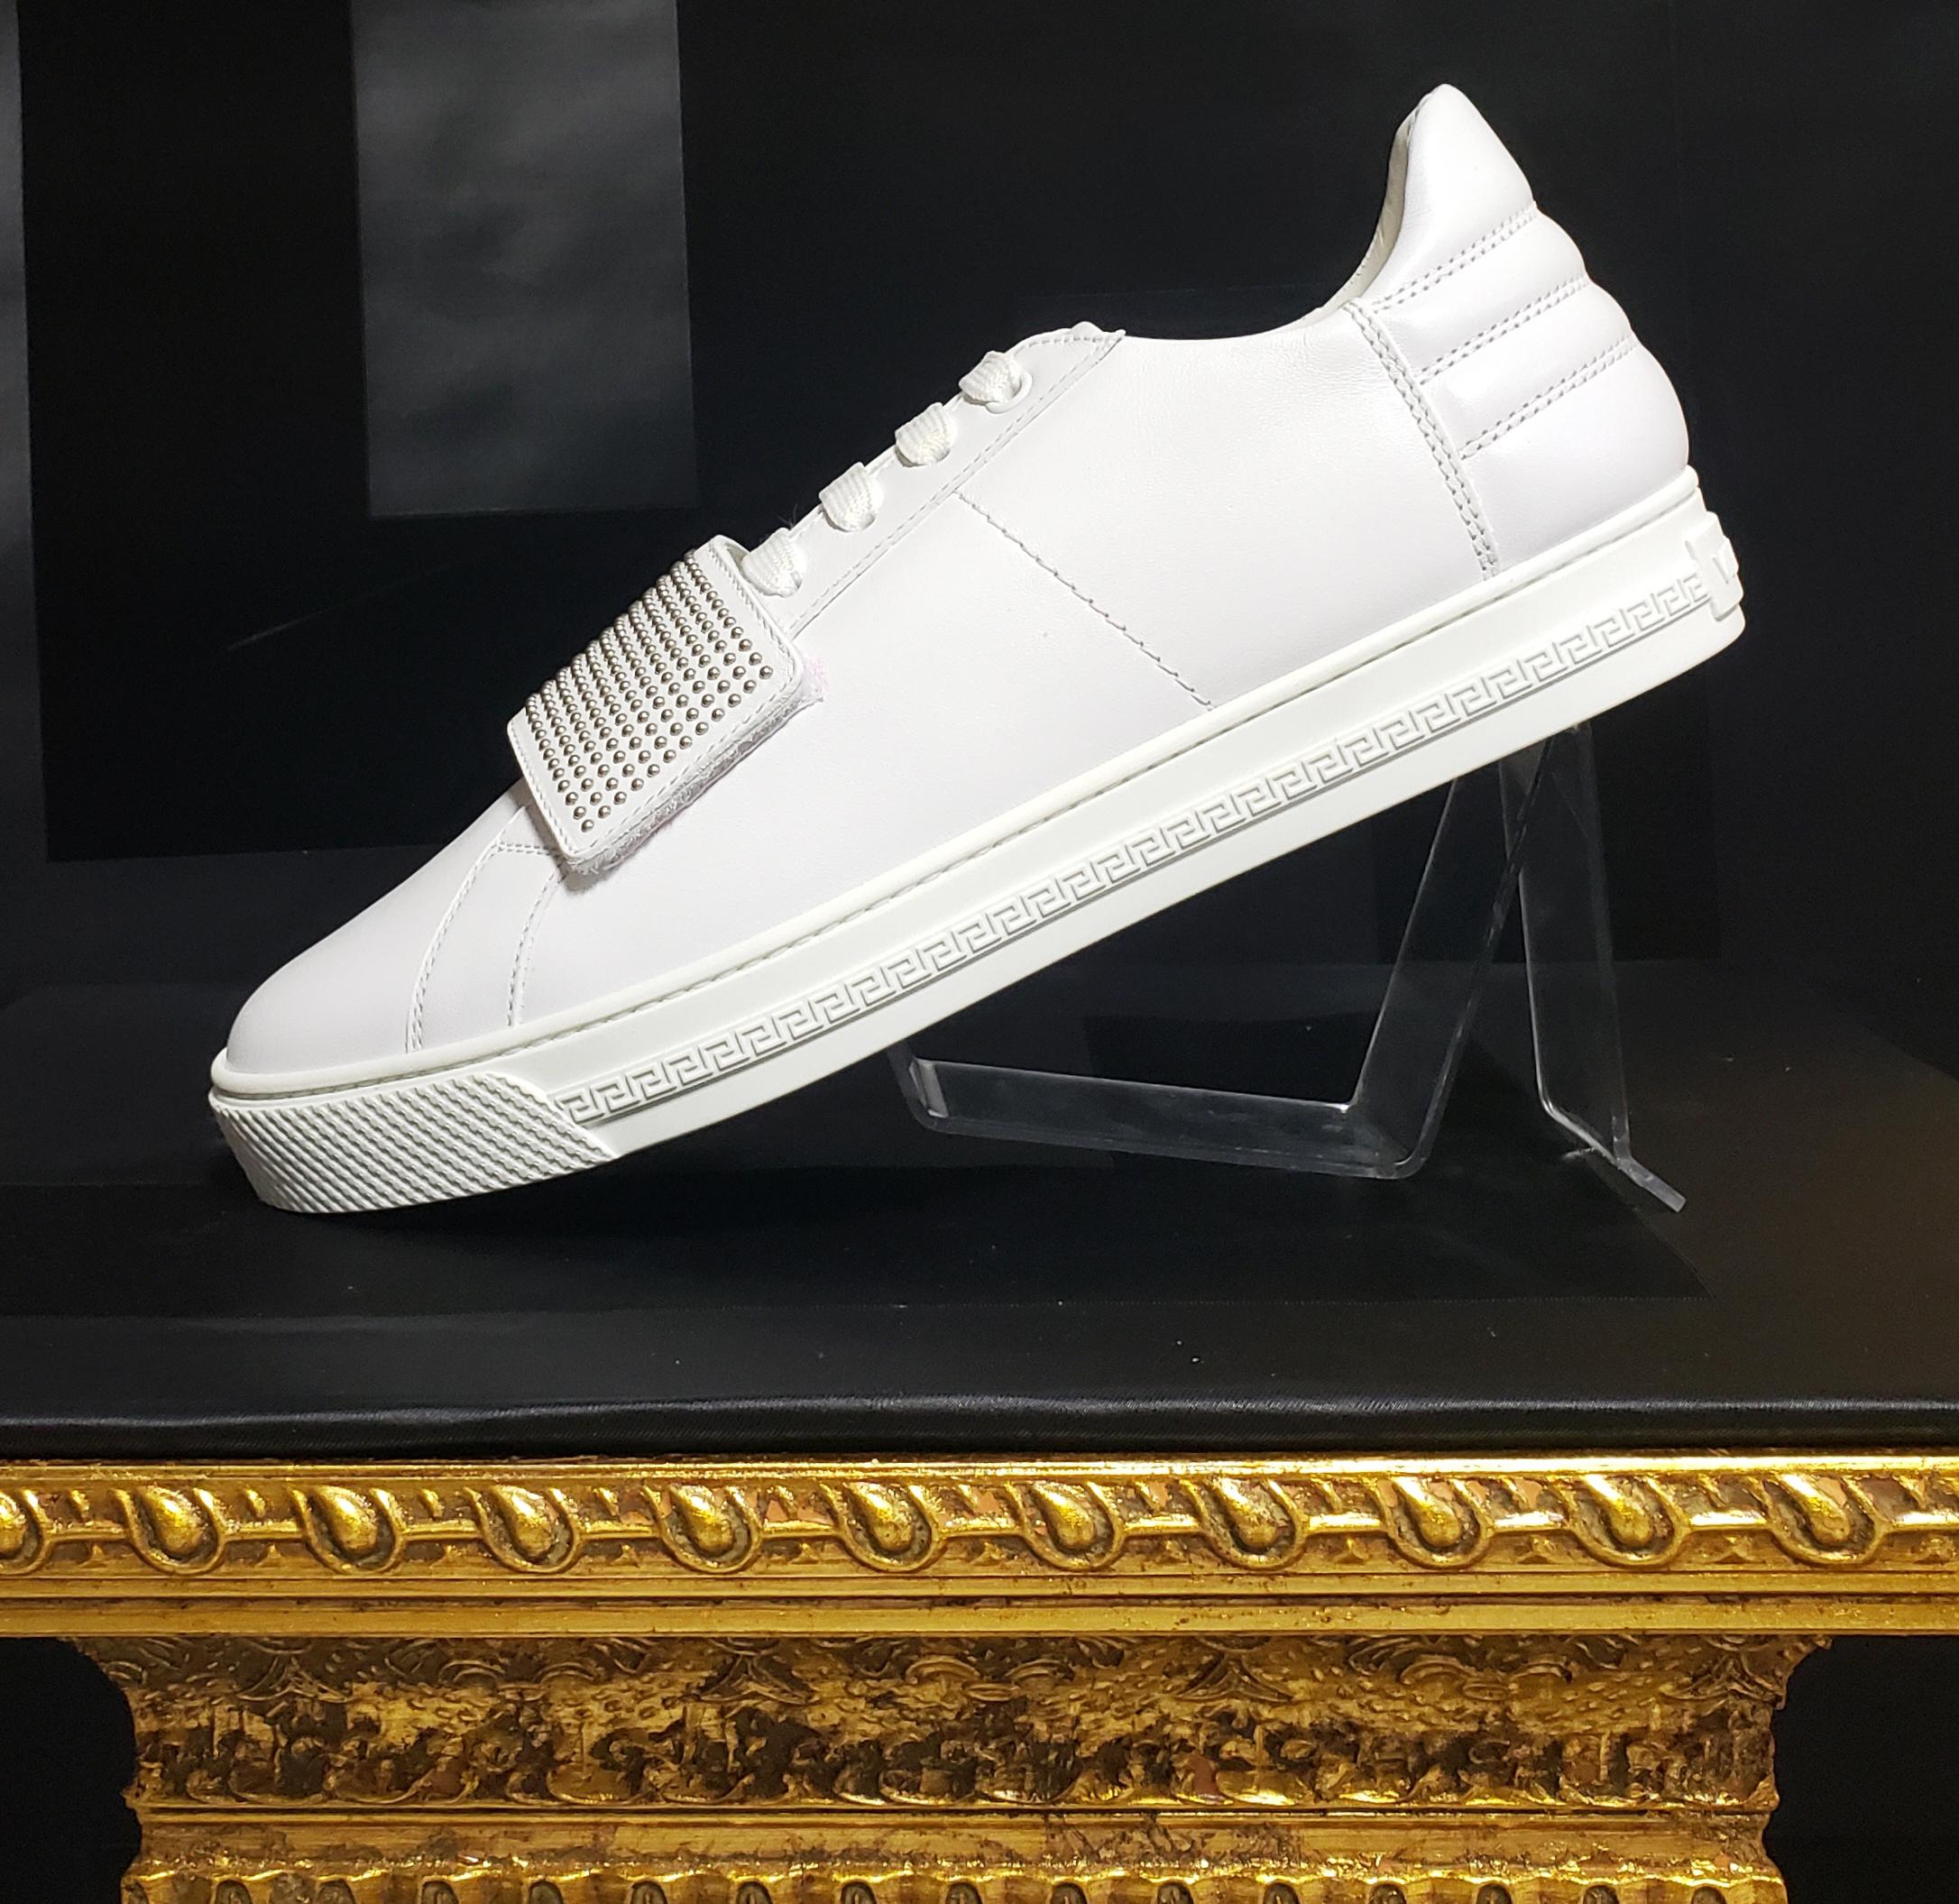 NEW VERSACE WHITE LEATHER SNEAKERS with a STUDDED BUCKLE 40 - 7 1